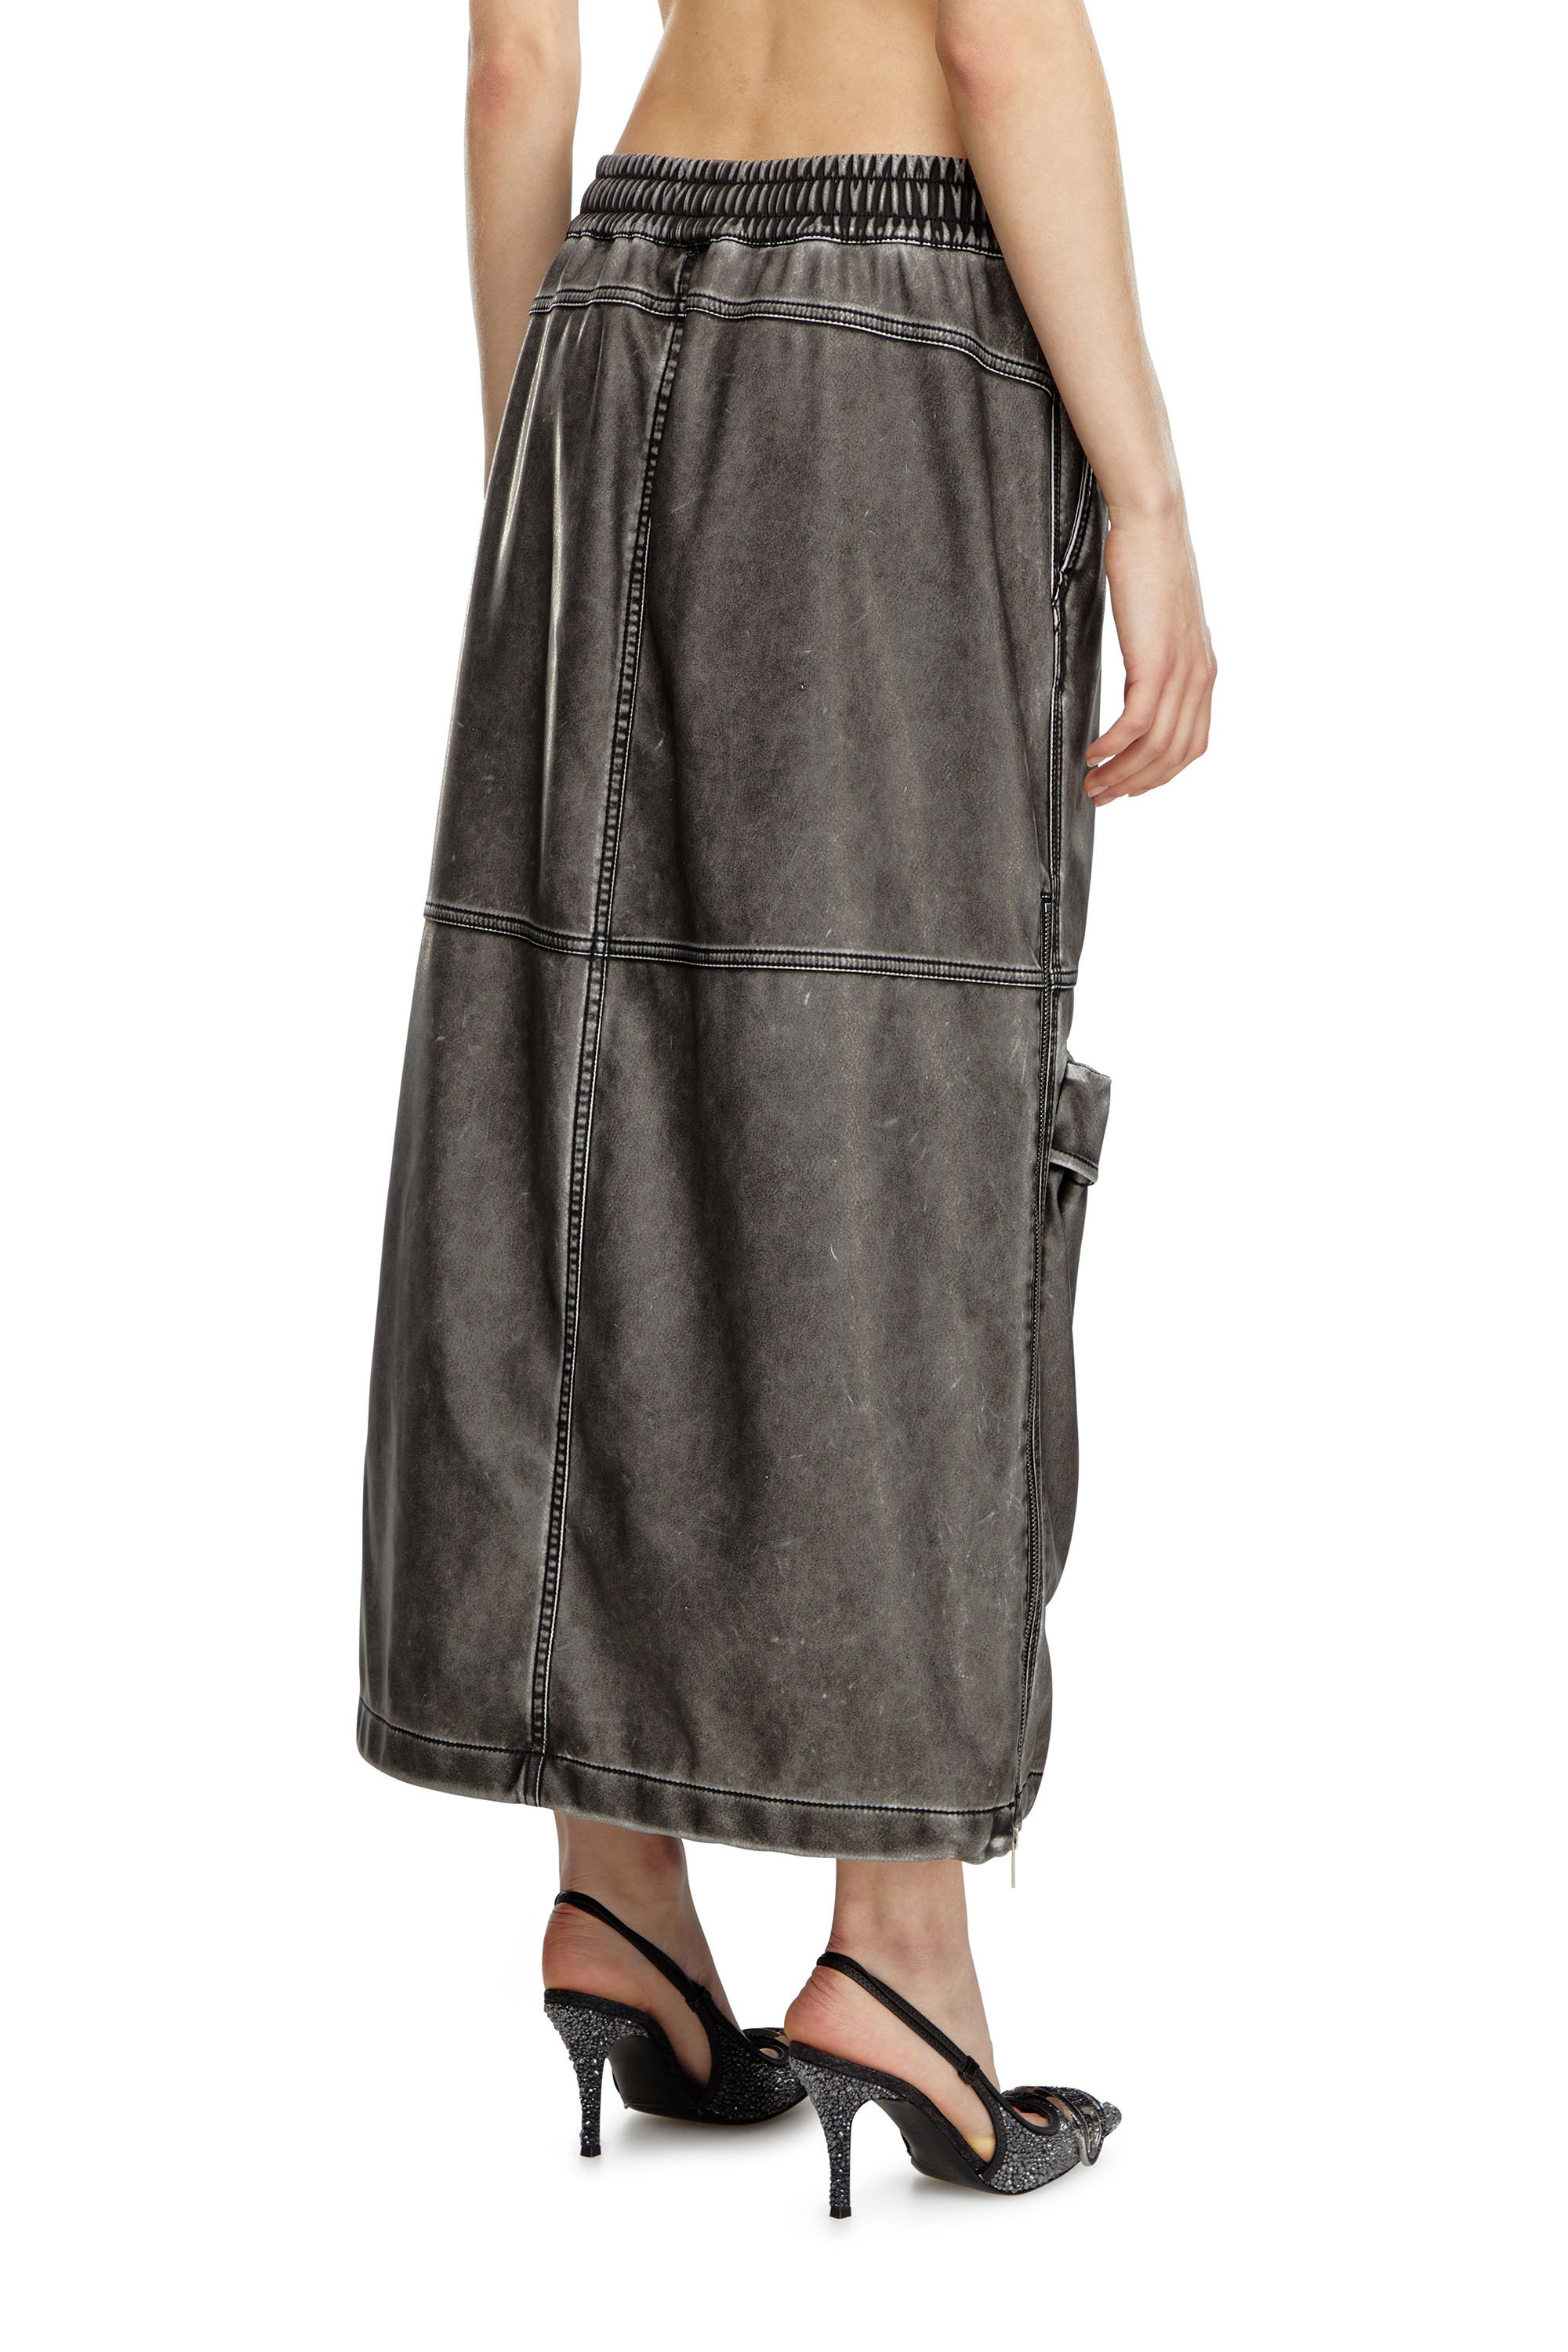 Diesel - O-DYSSEY-P1, Female Long skirt in washed tech fabric in Grey - Image 4